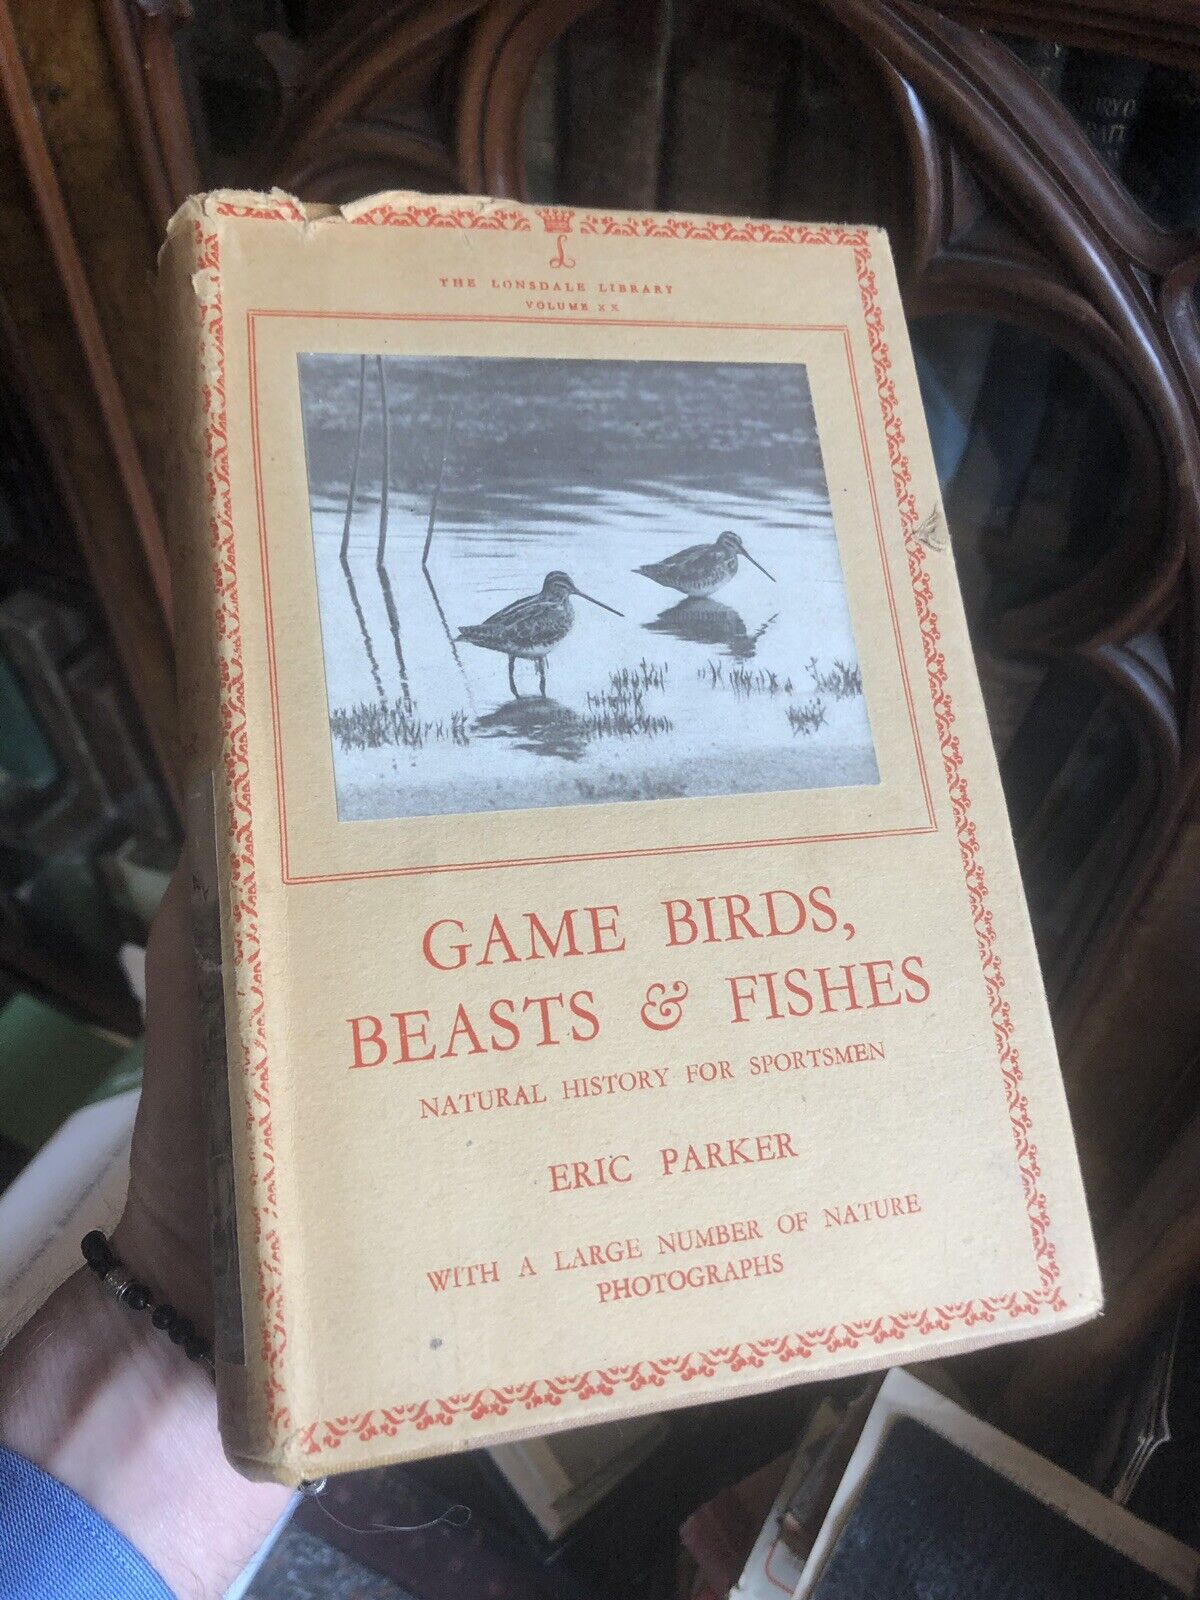 Game Birds, Bests & Fishes - Natural History for Sportsmen - Hunting Shooting